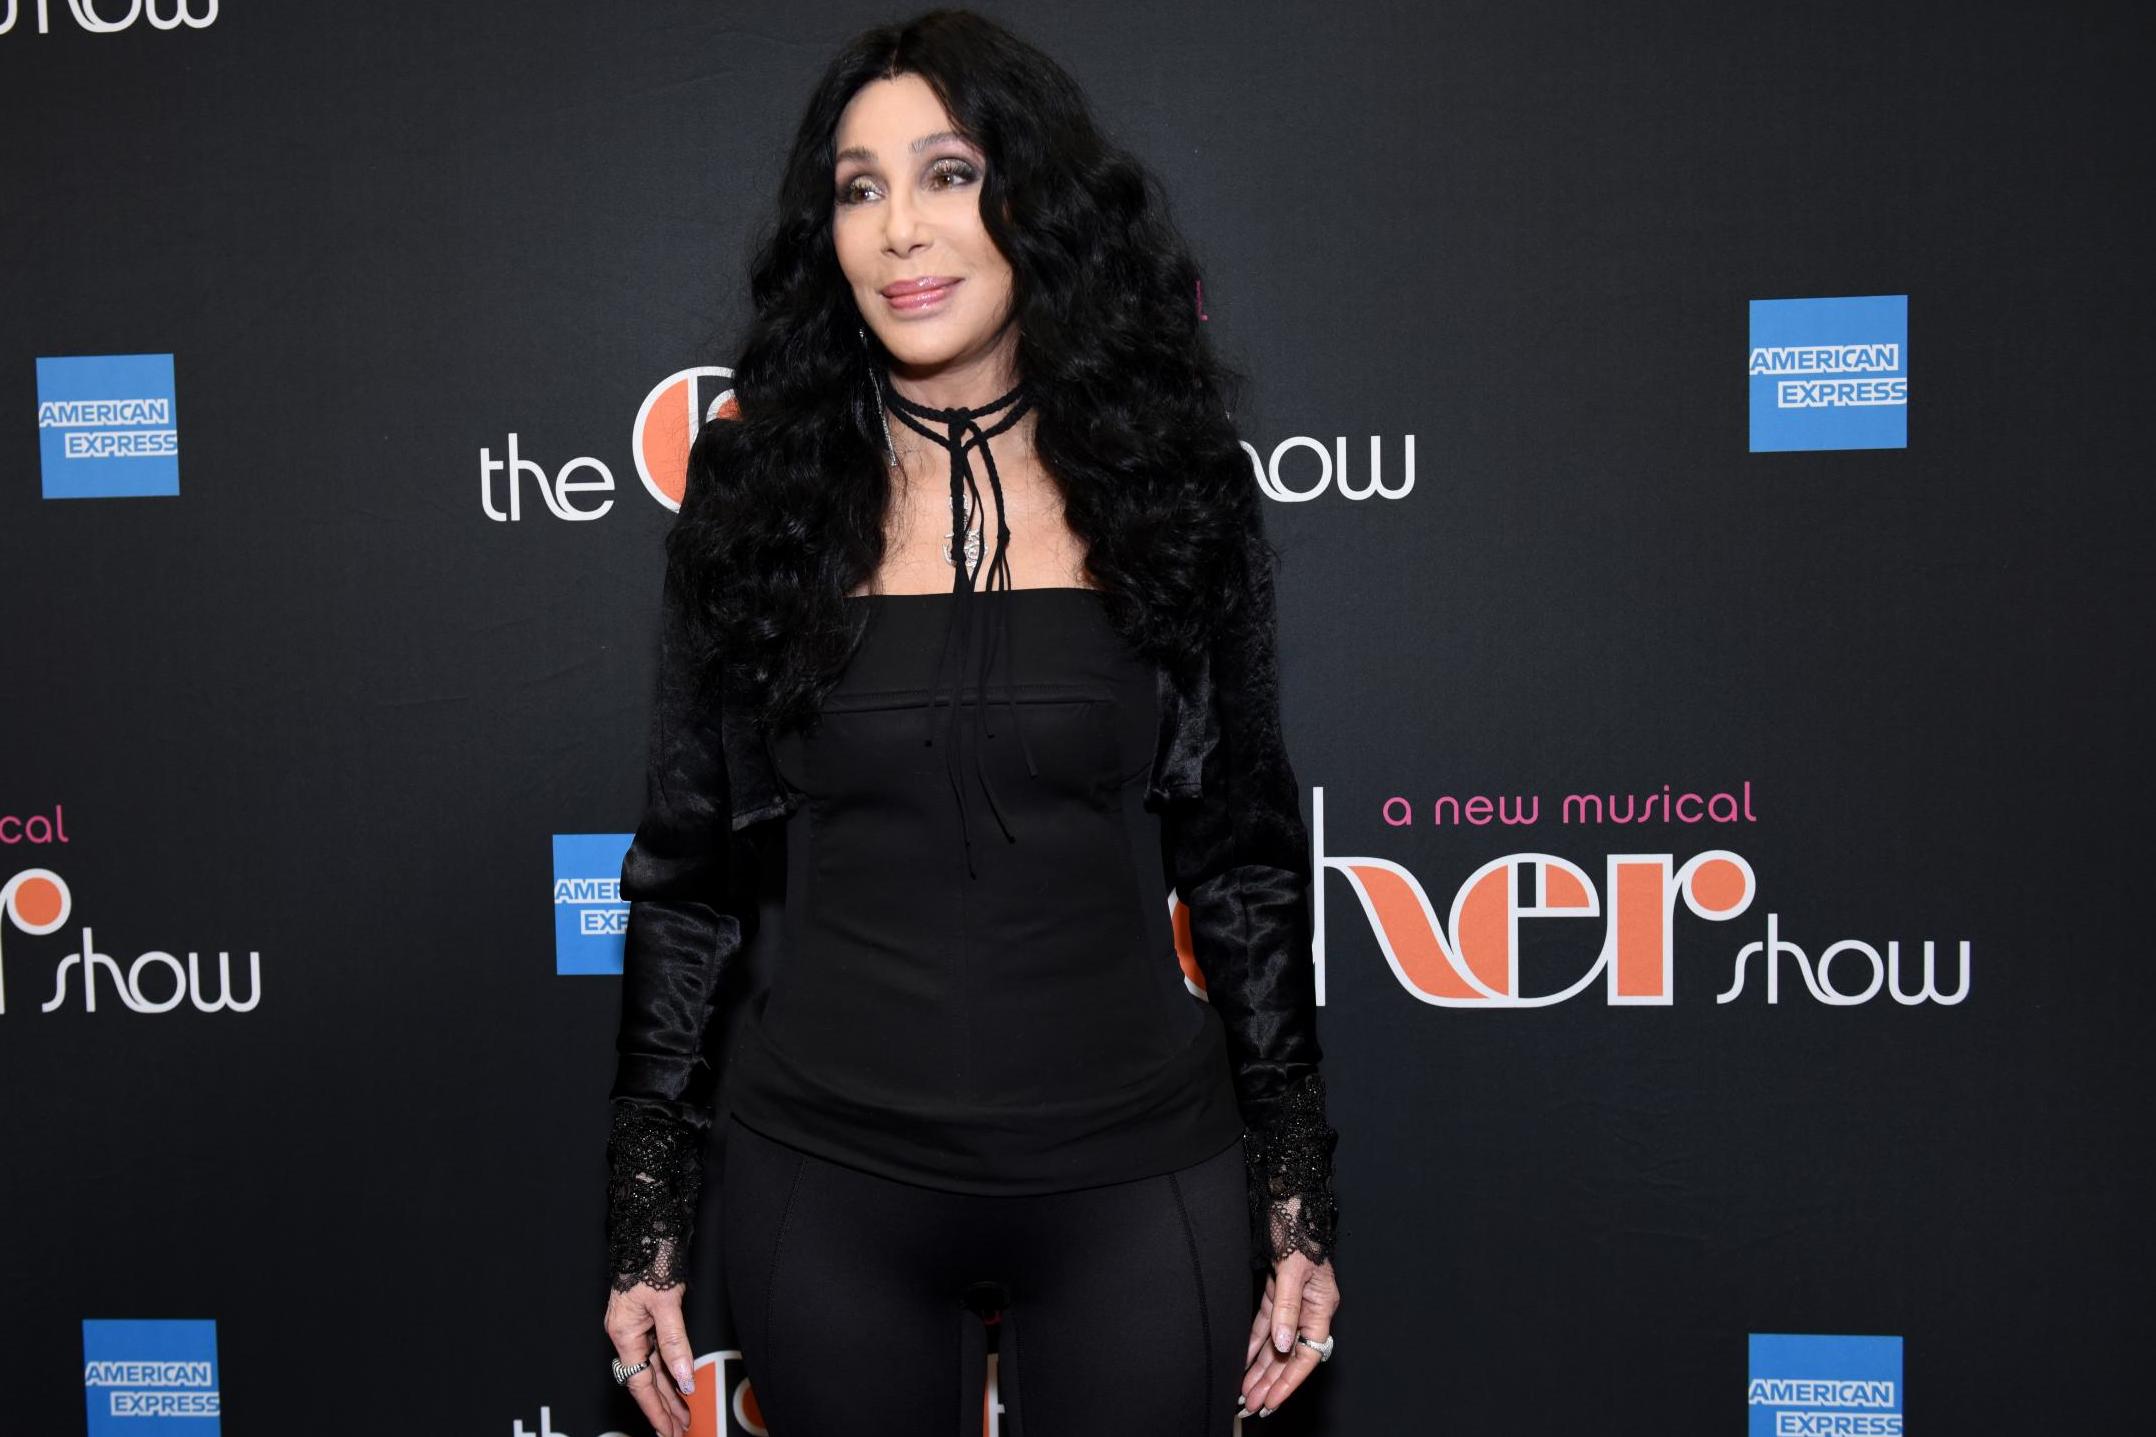 Cher weighs in on Joe Biden controversy saying he hugged her: 'He must care about women's space'